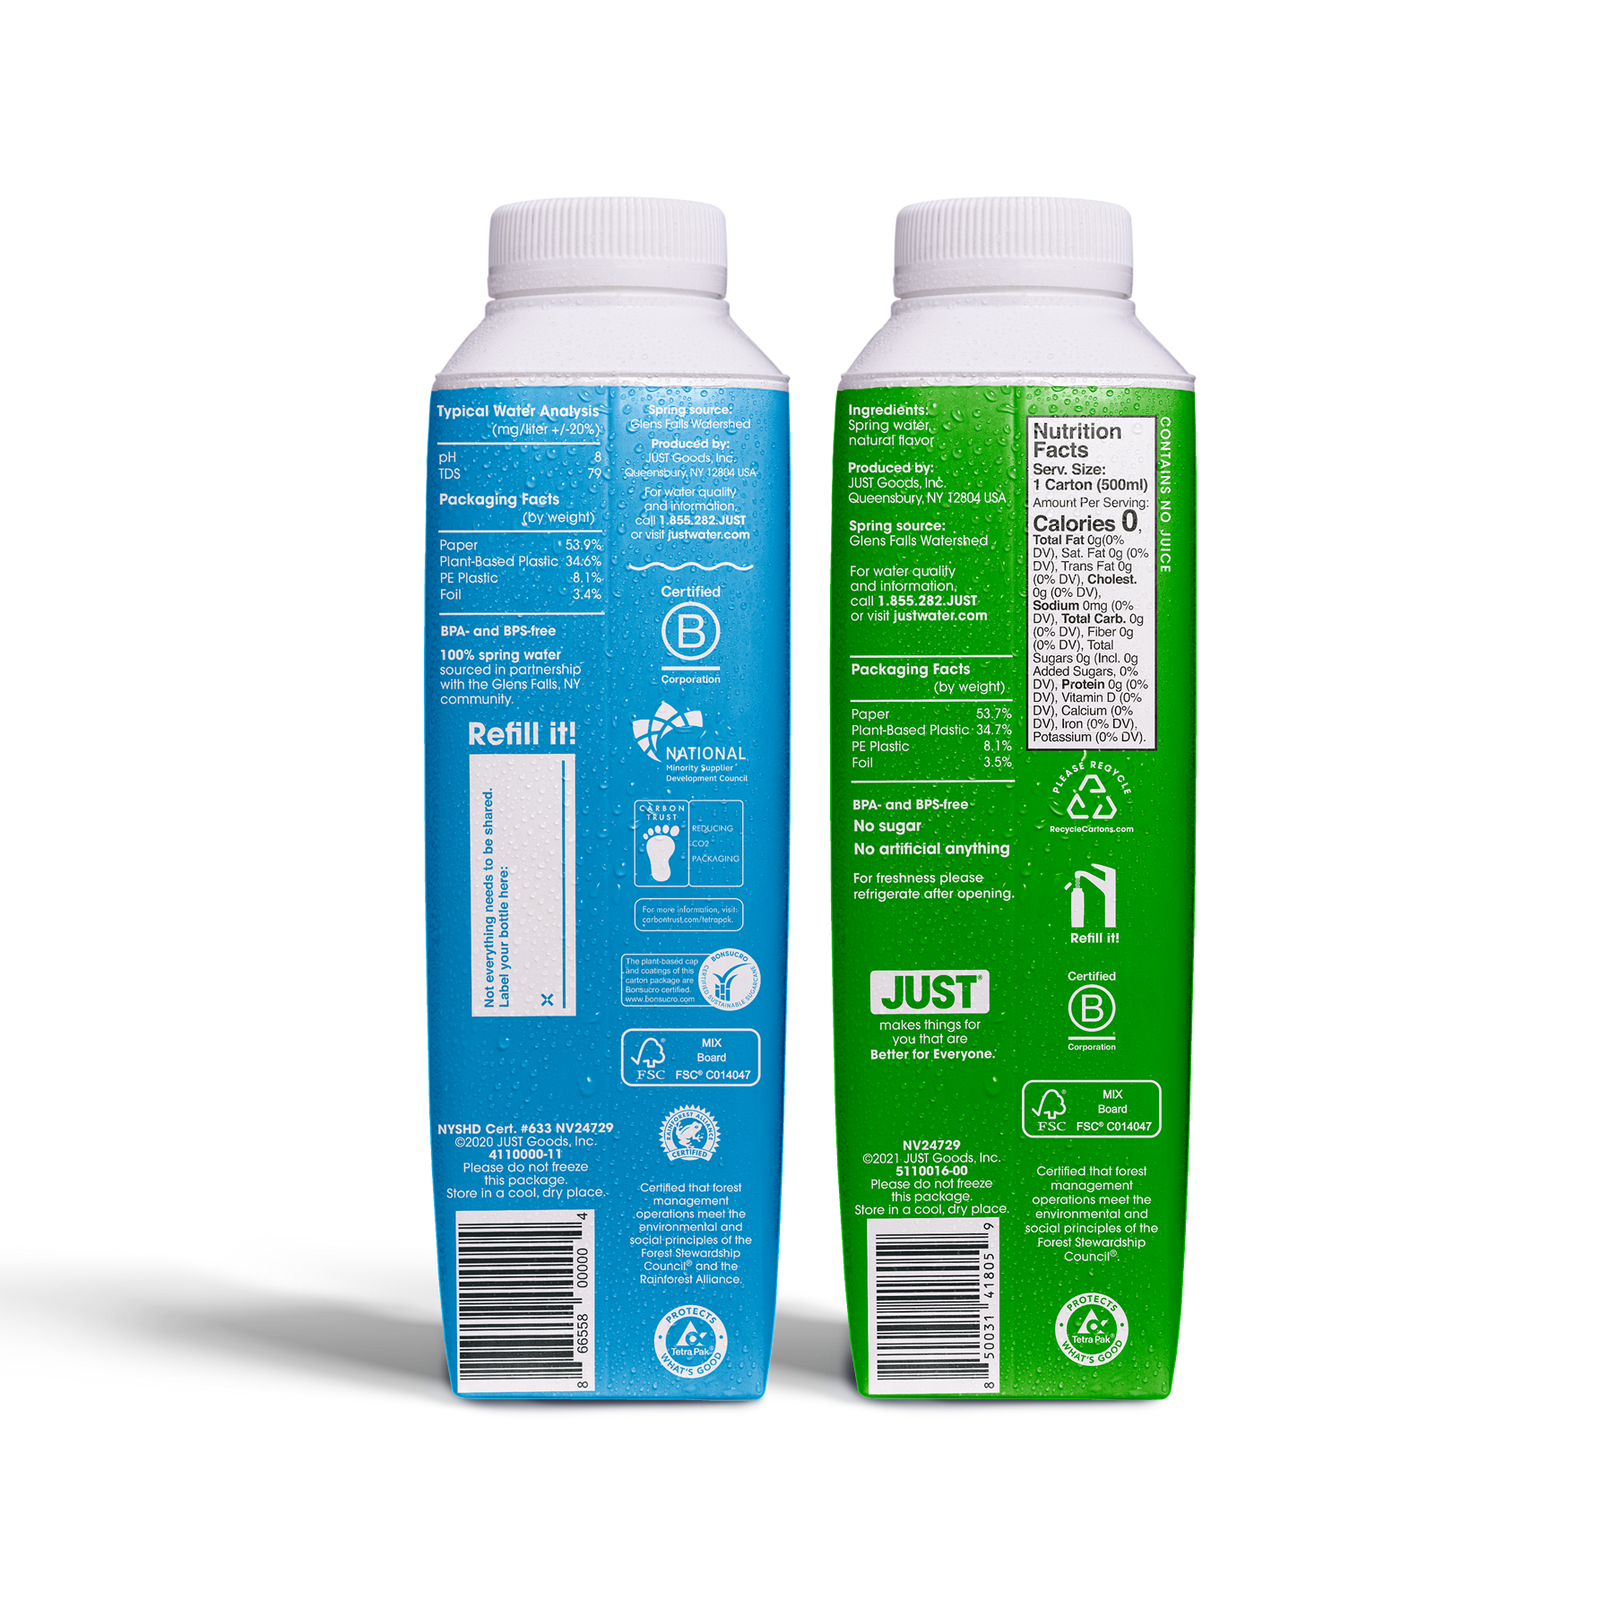 JUST Water Infused - Mint Flavored with Spring Water - Eco-Friendly and  Sustainable, Boxed Bottled Water - Low Calorie Beverage with No Artificial  Flavors, Alkaline pH of 8.0 - 16.9 oz (Pack